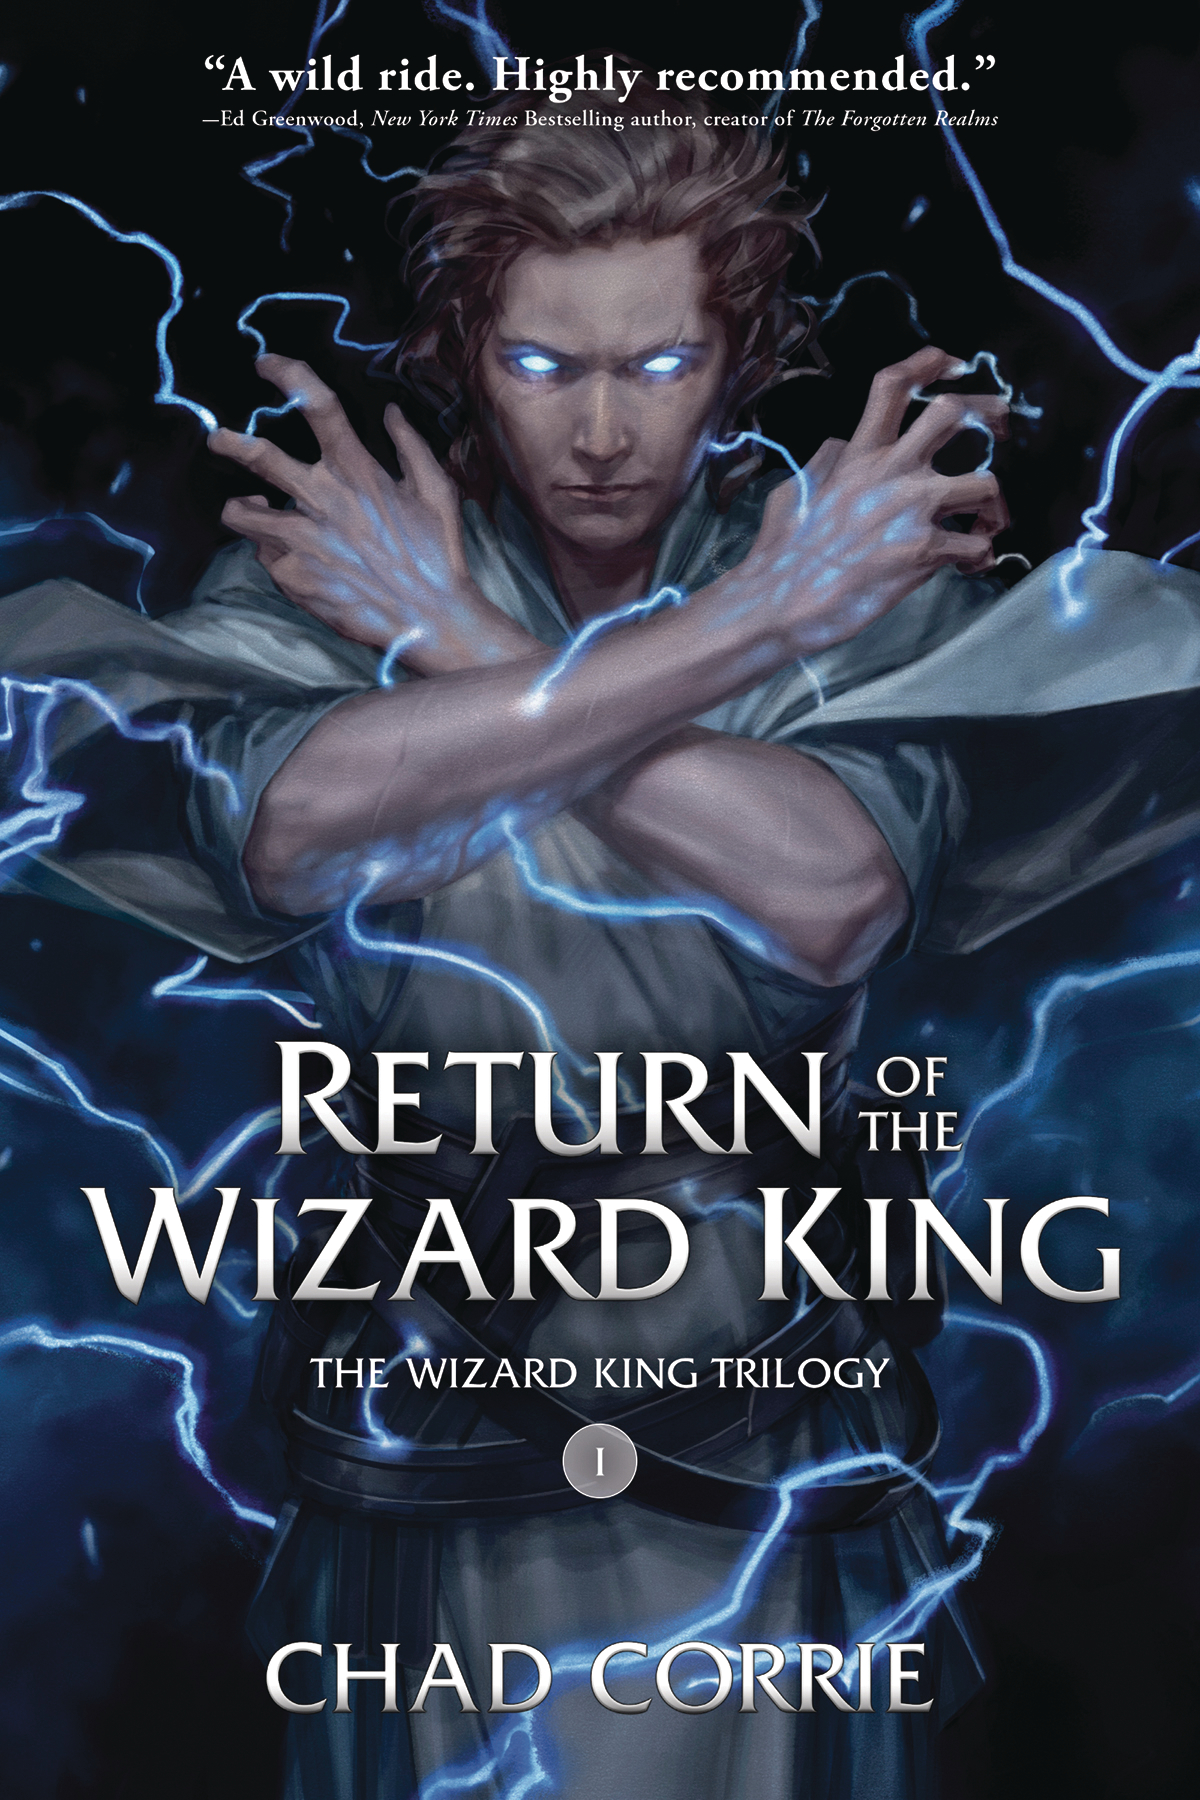 Return of the Wizard King